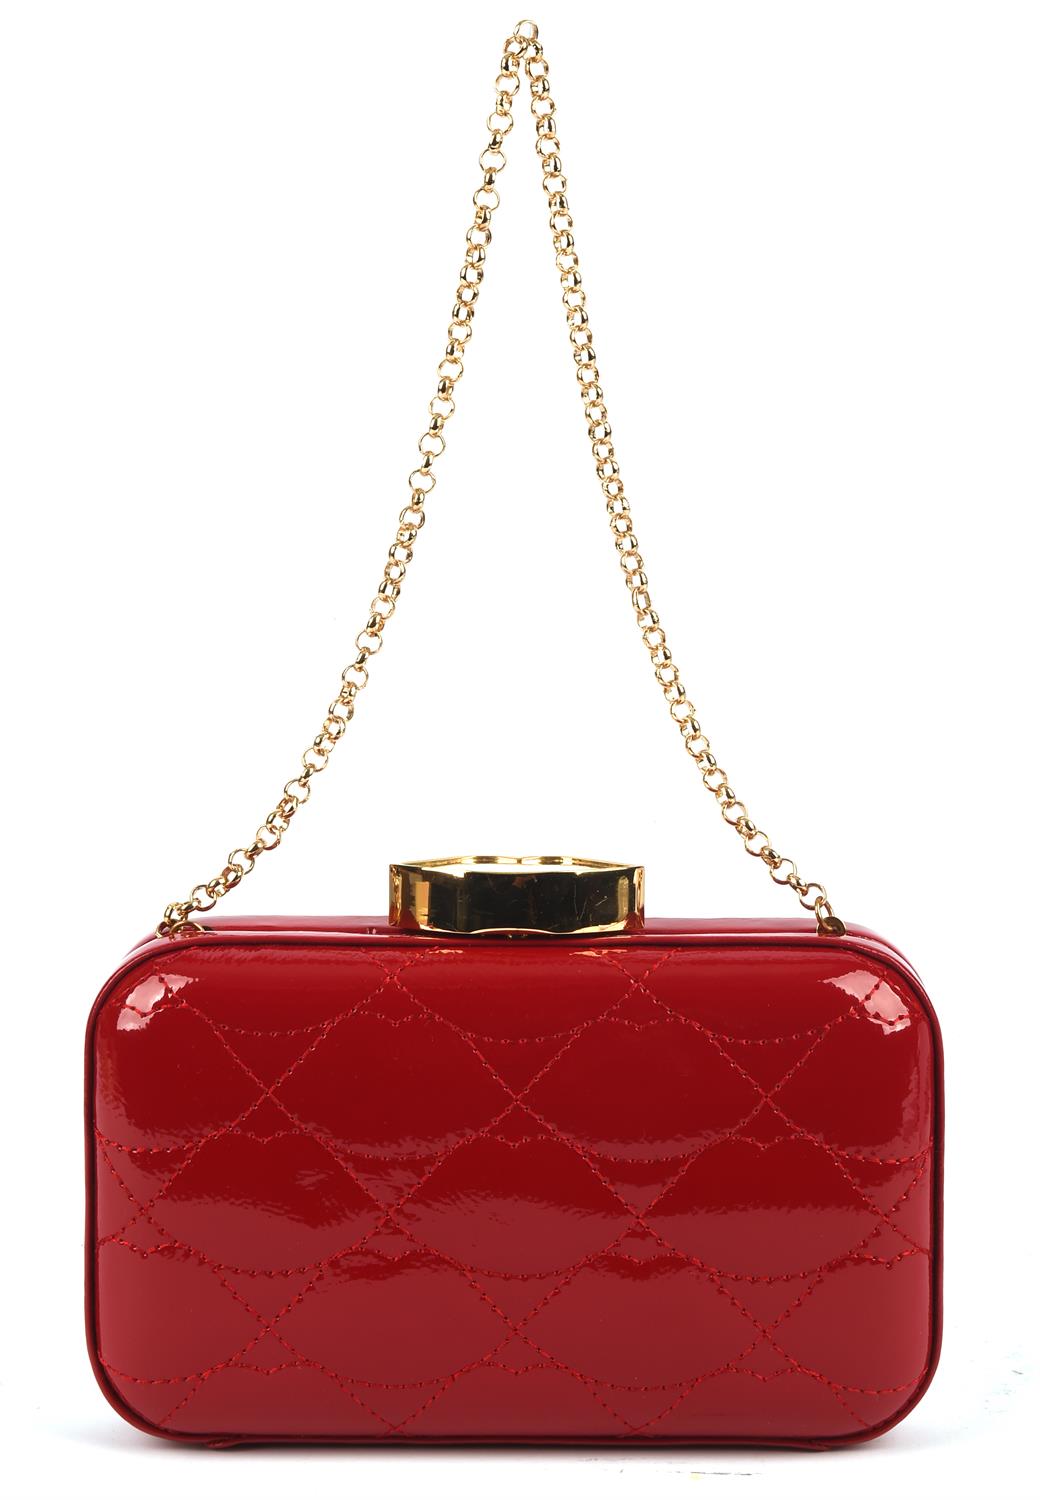 LULU GUINNESS boxed lipstick red leather lips handbag with gold chain and hardware with dust bag